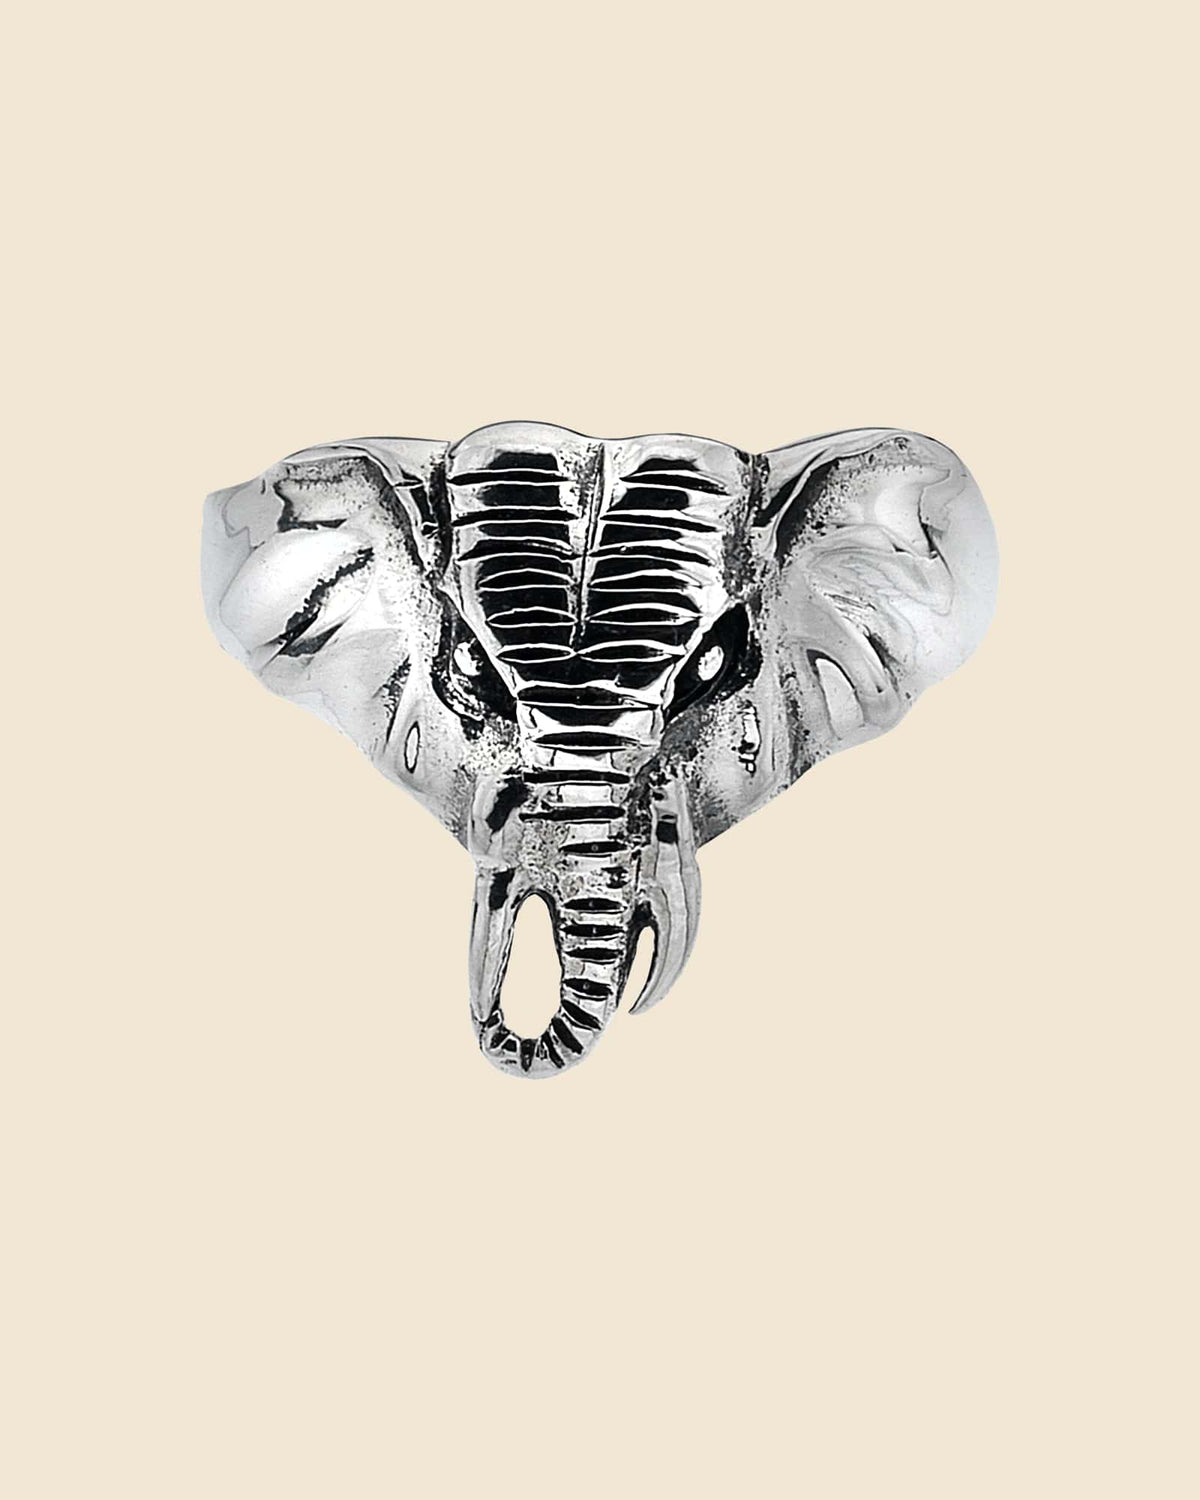 Sterling Silver Elephant Head Ring